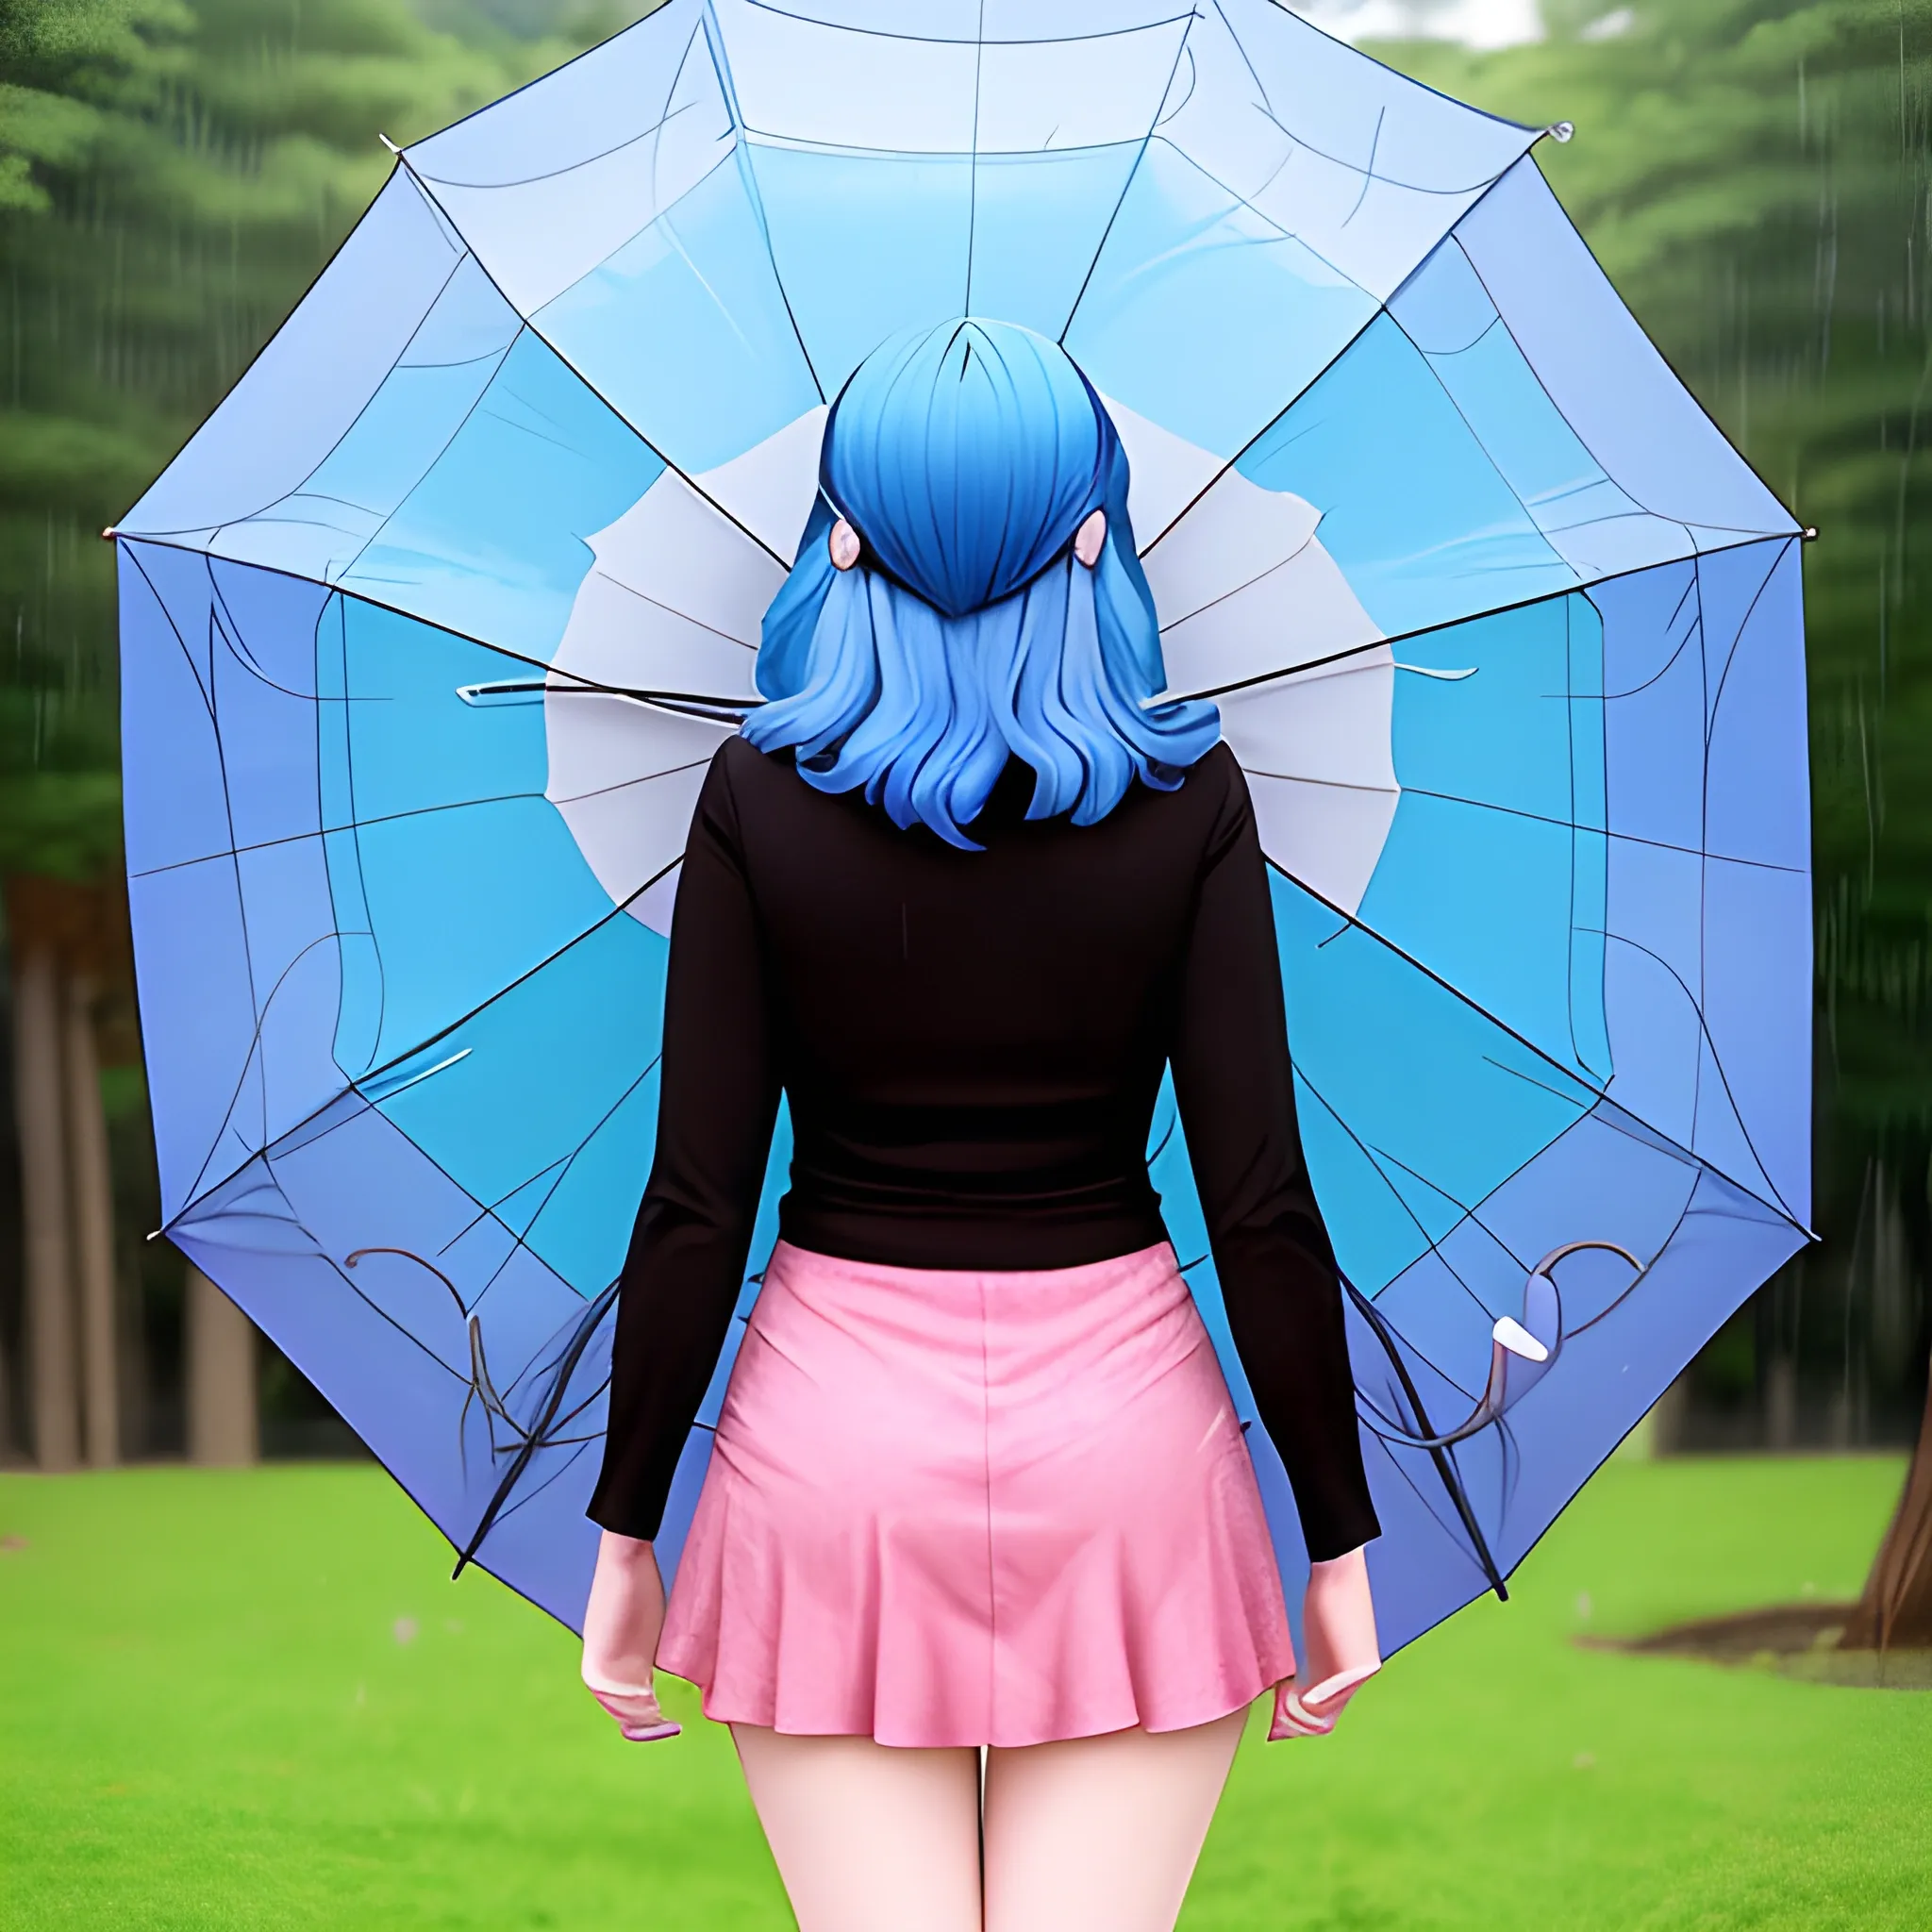 Girl Big eyes, No error eyes,  blue hair, back view and head 3/4 , girl anime , no more fingers, no more arms and foots, have a umbrella in the lef hand
